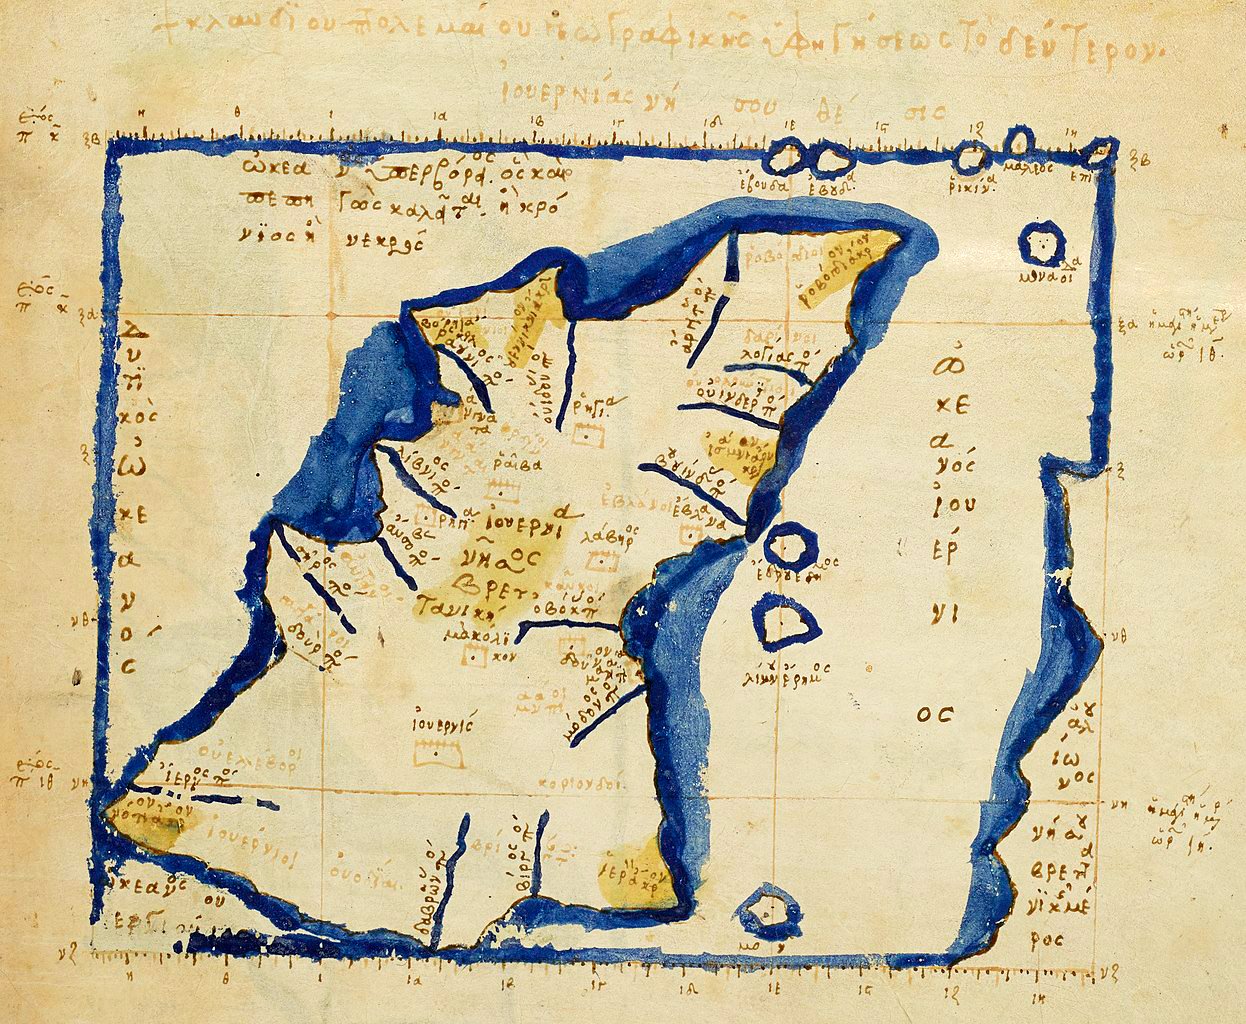 A 1420 image showcasing the westernmost section of an early European map from a Greek manuscript based on Ptolemy's Geography, highlighting Ireland, referred to as Ivernia Island.